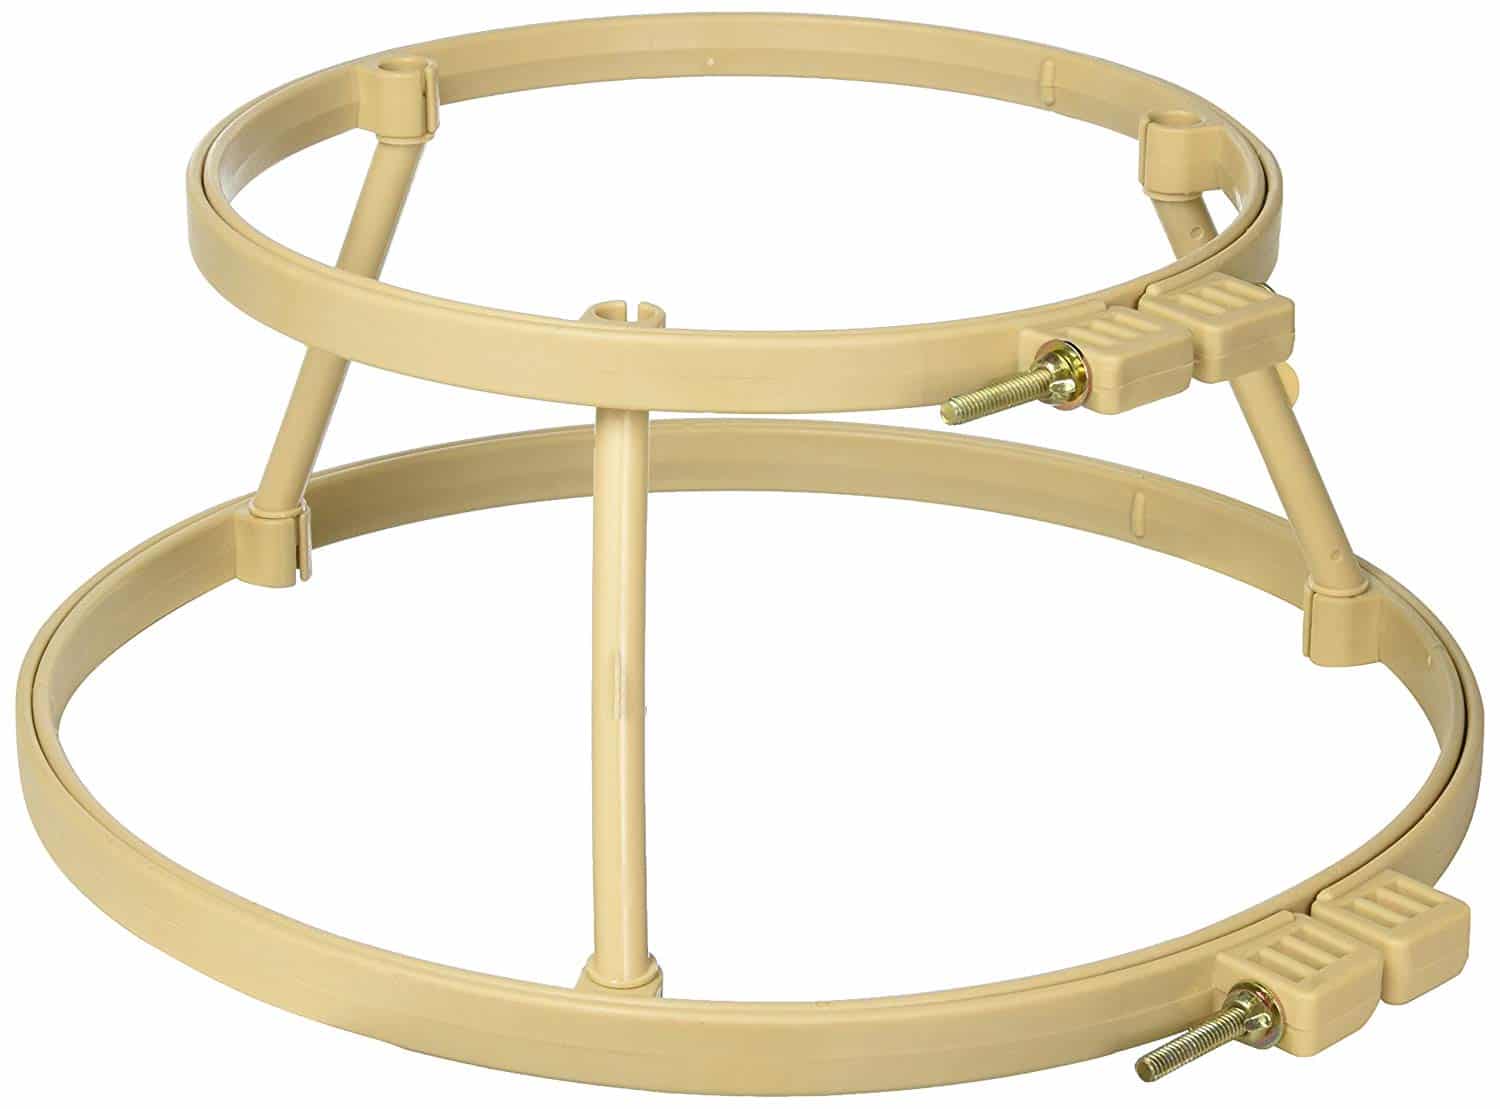 Morgan Products Lap Stand Combo Hoops